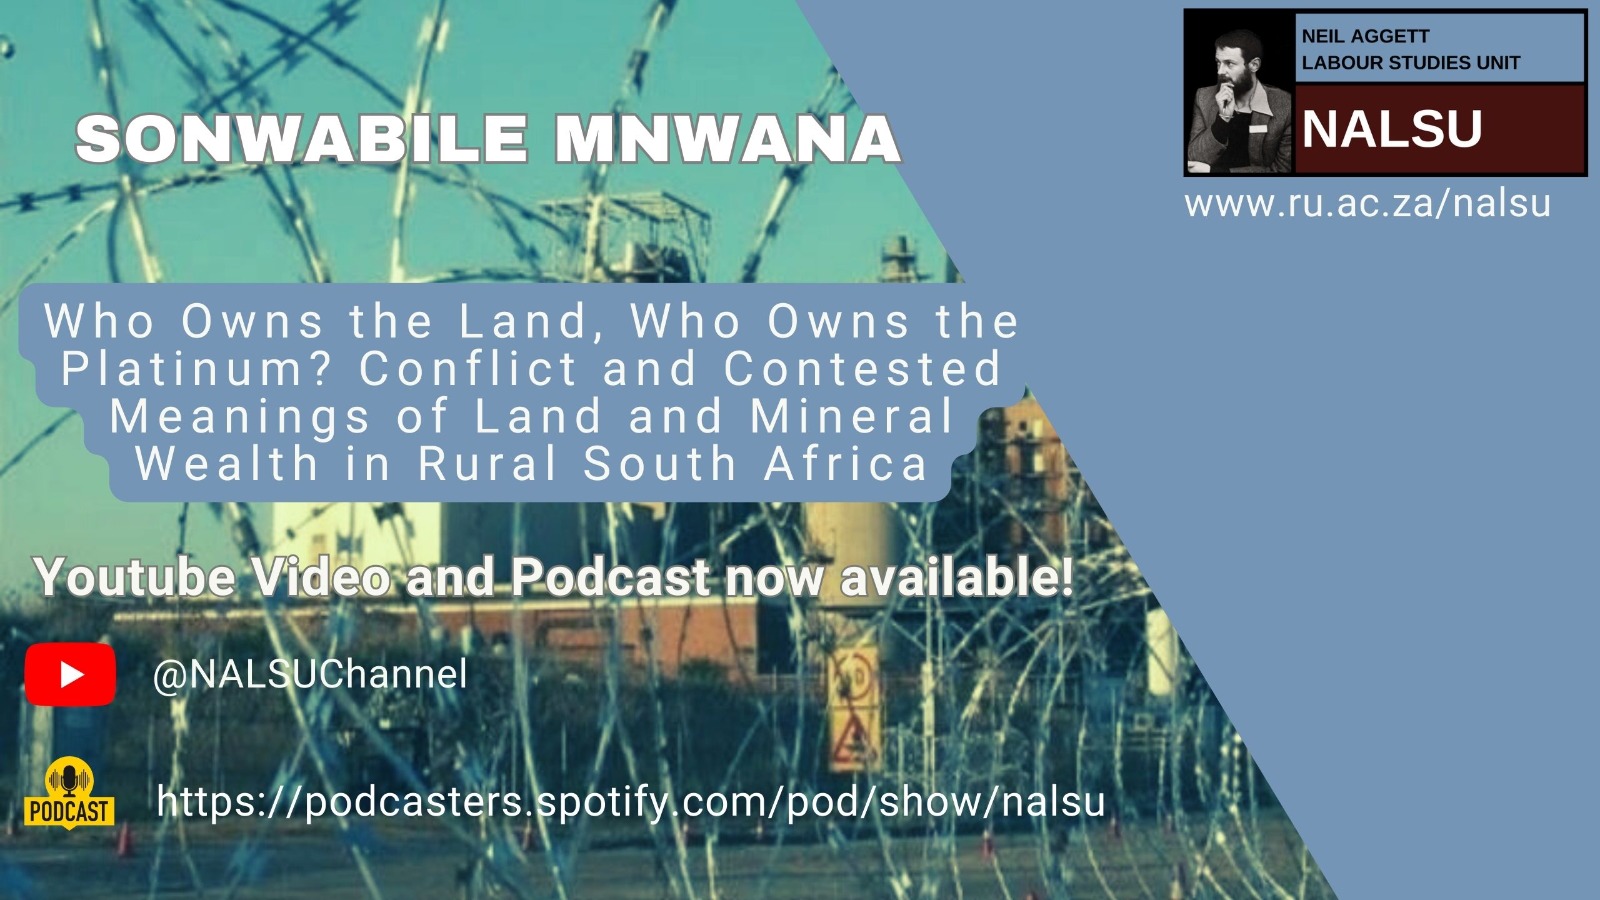 Who Owns the Land, Who Owns the Platinum? Conflict and Contested Meanings of Land and Mineral Wealth in Rural South Africa?